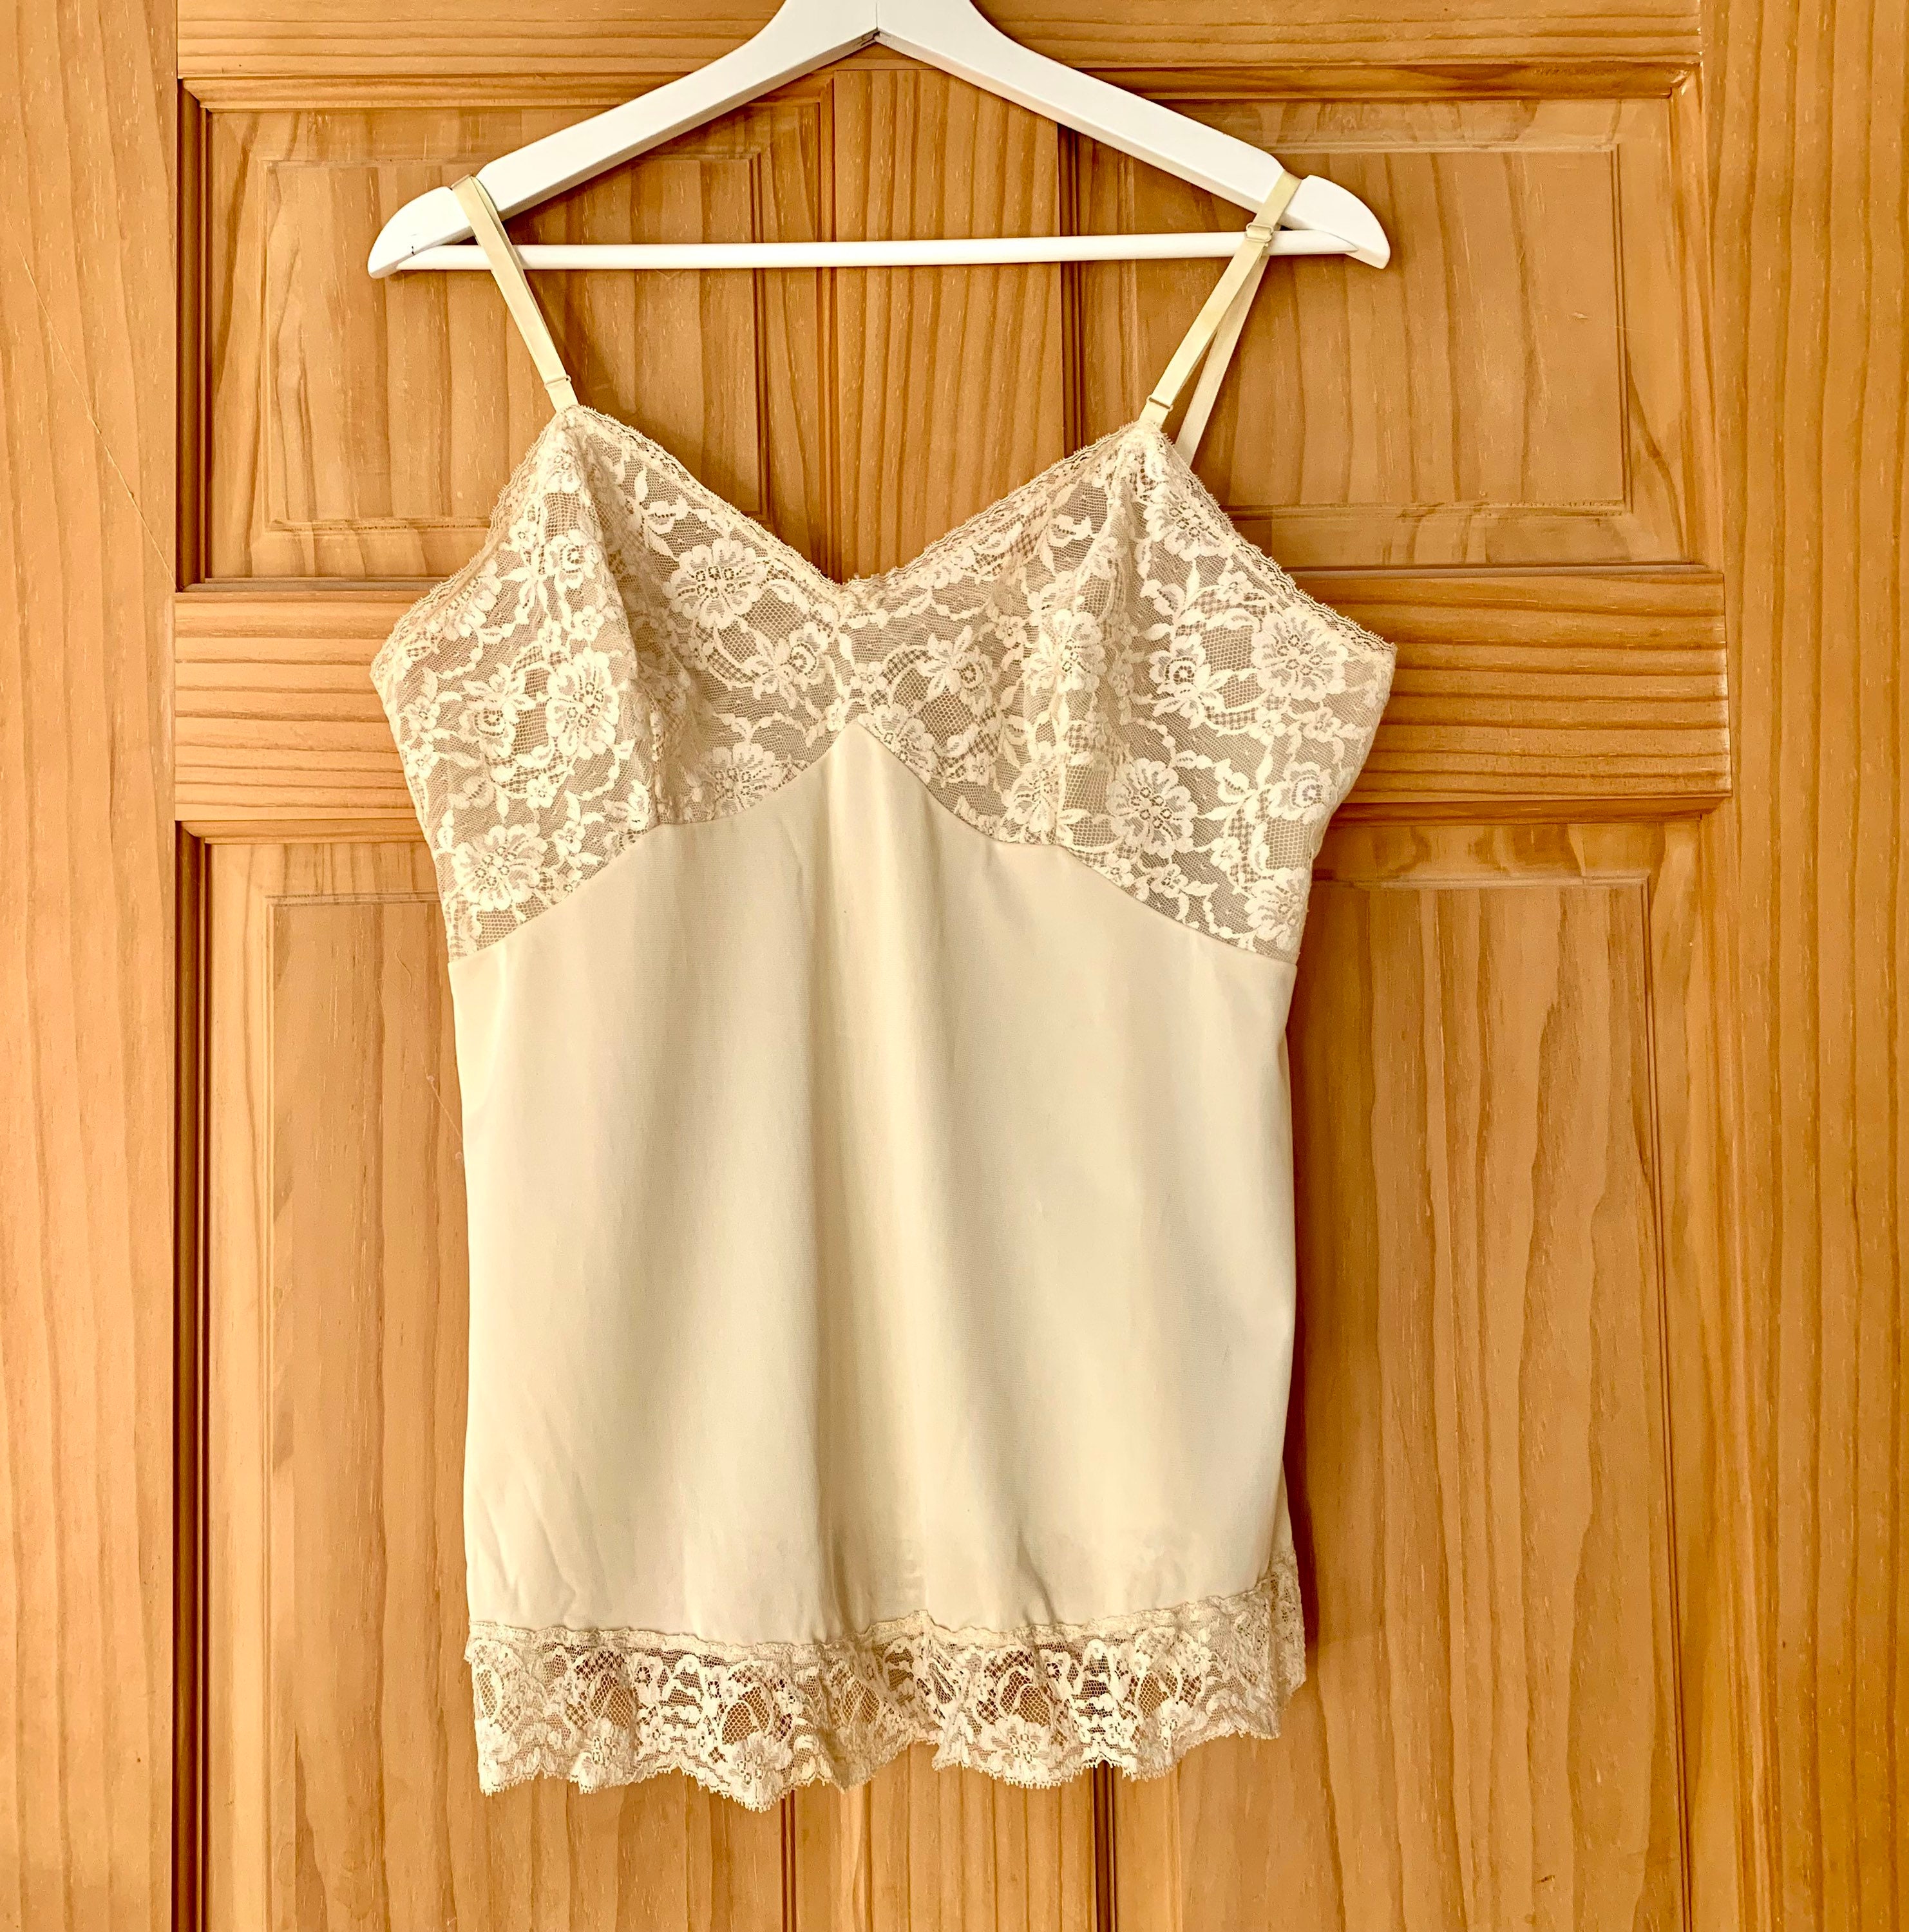 Camisole Half Slip Top, Vintage Vanity Fair Lingerie, Ivory Cream Nylon  Antron With Lace, Size 38, Made in USA 